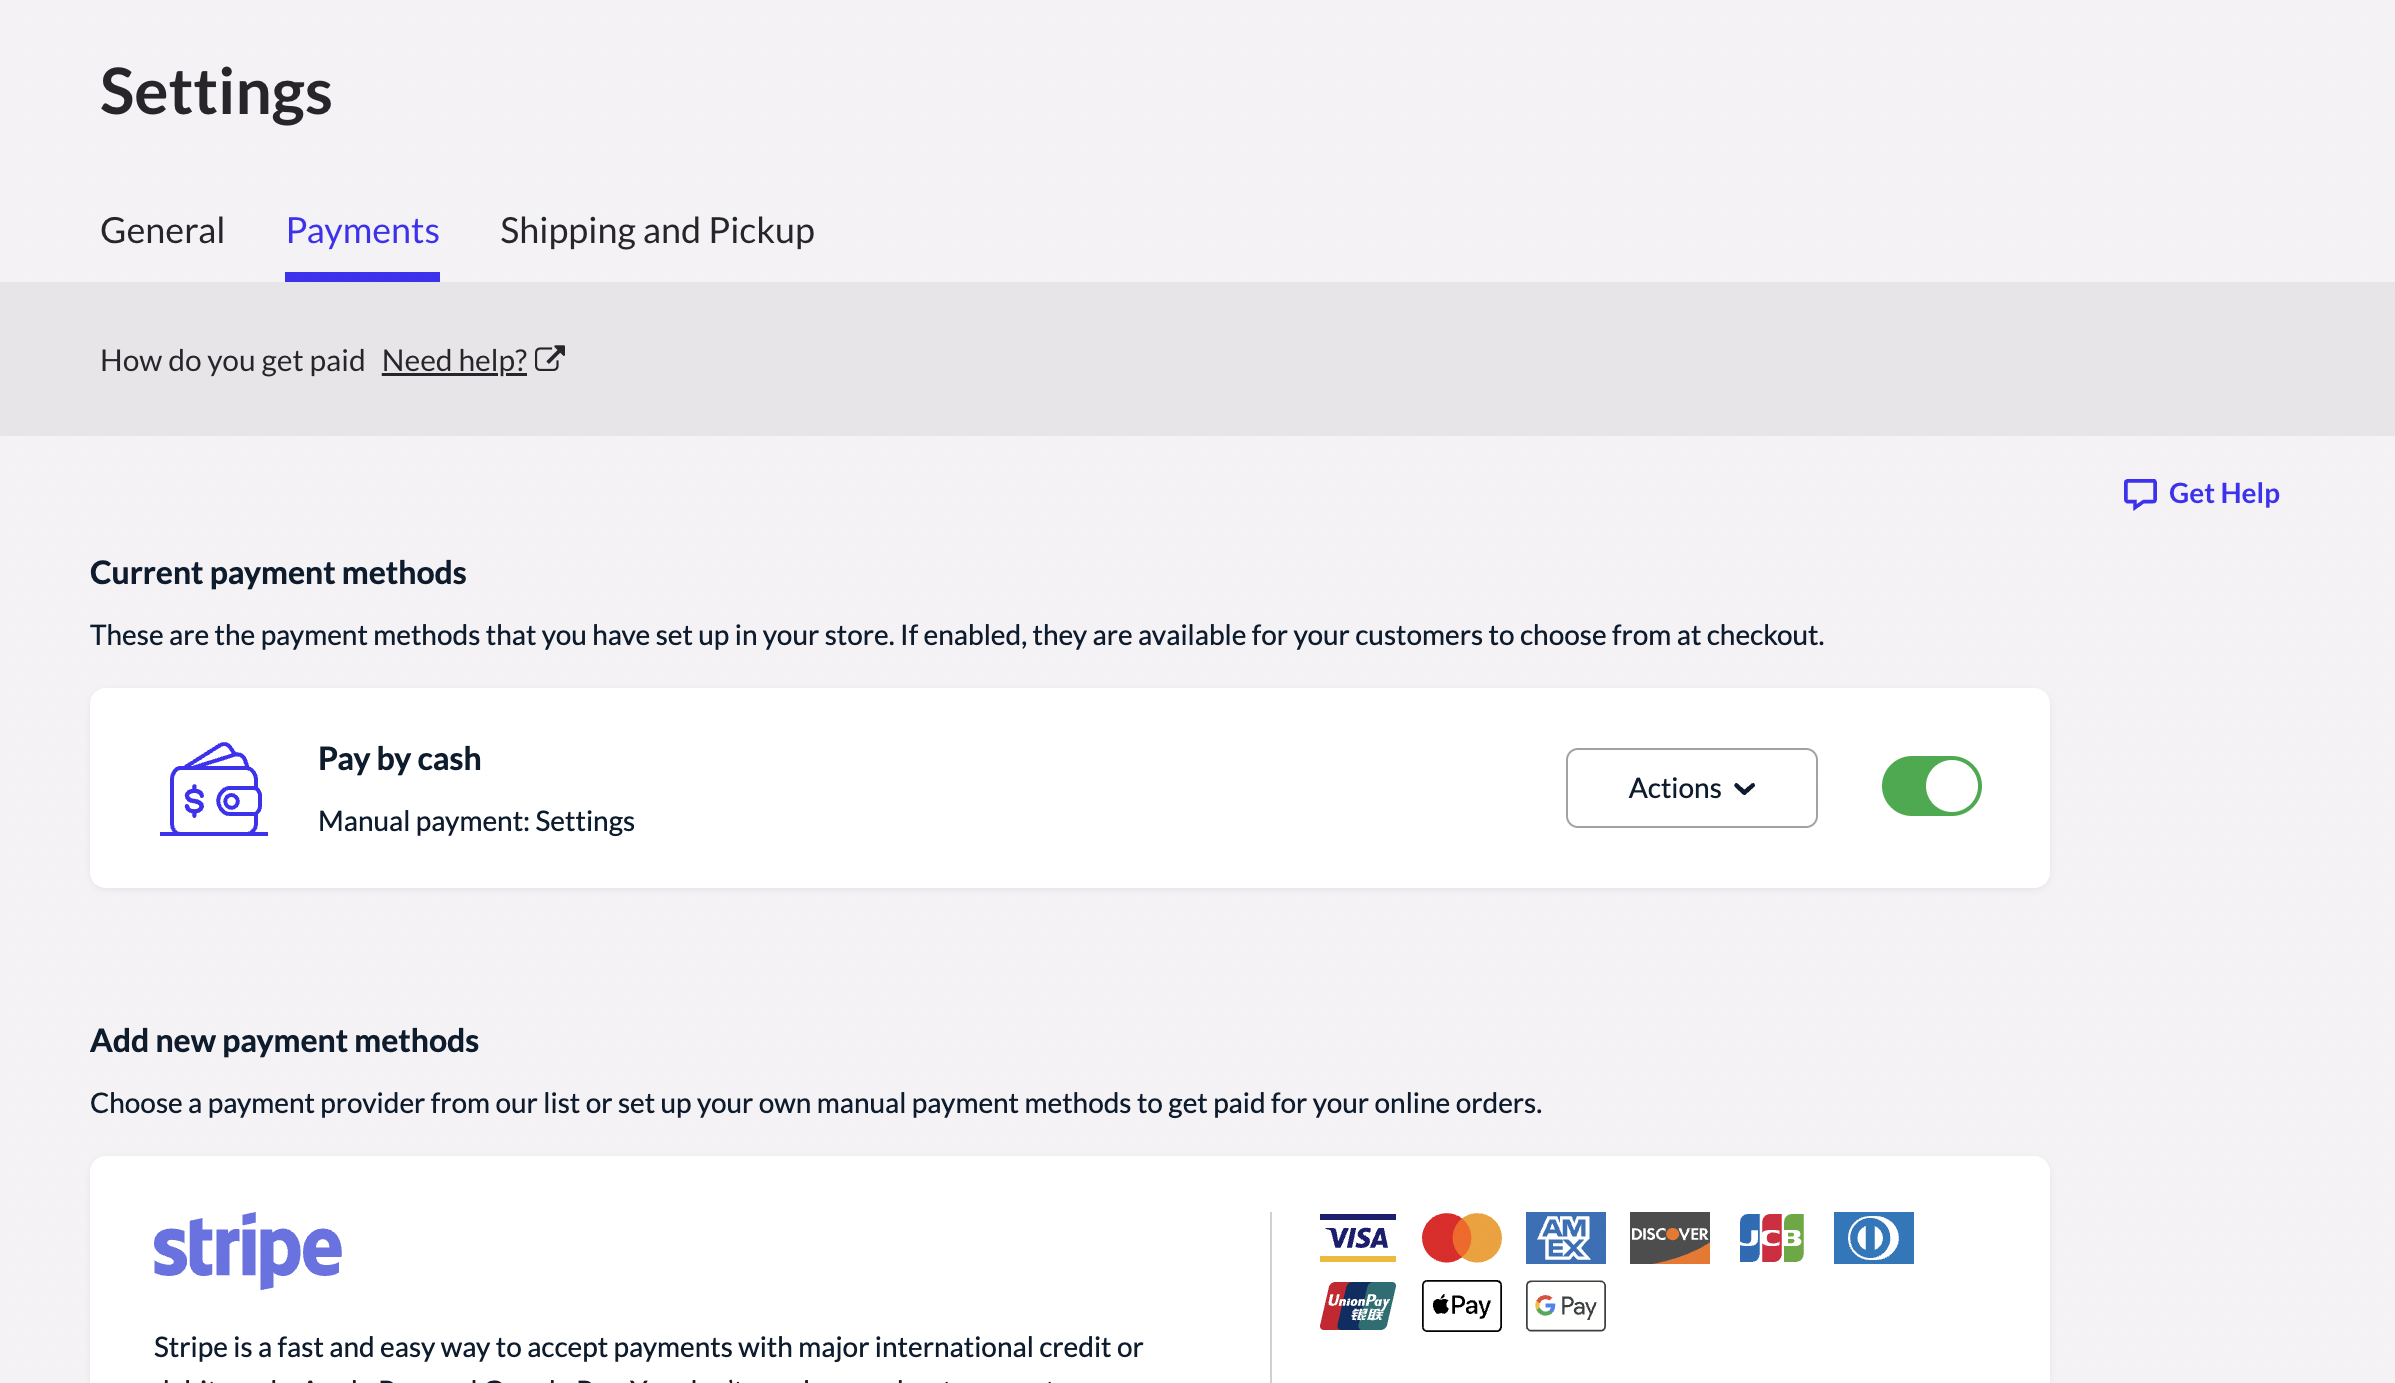 Showing the options available on the payment settings page